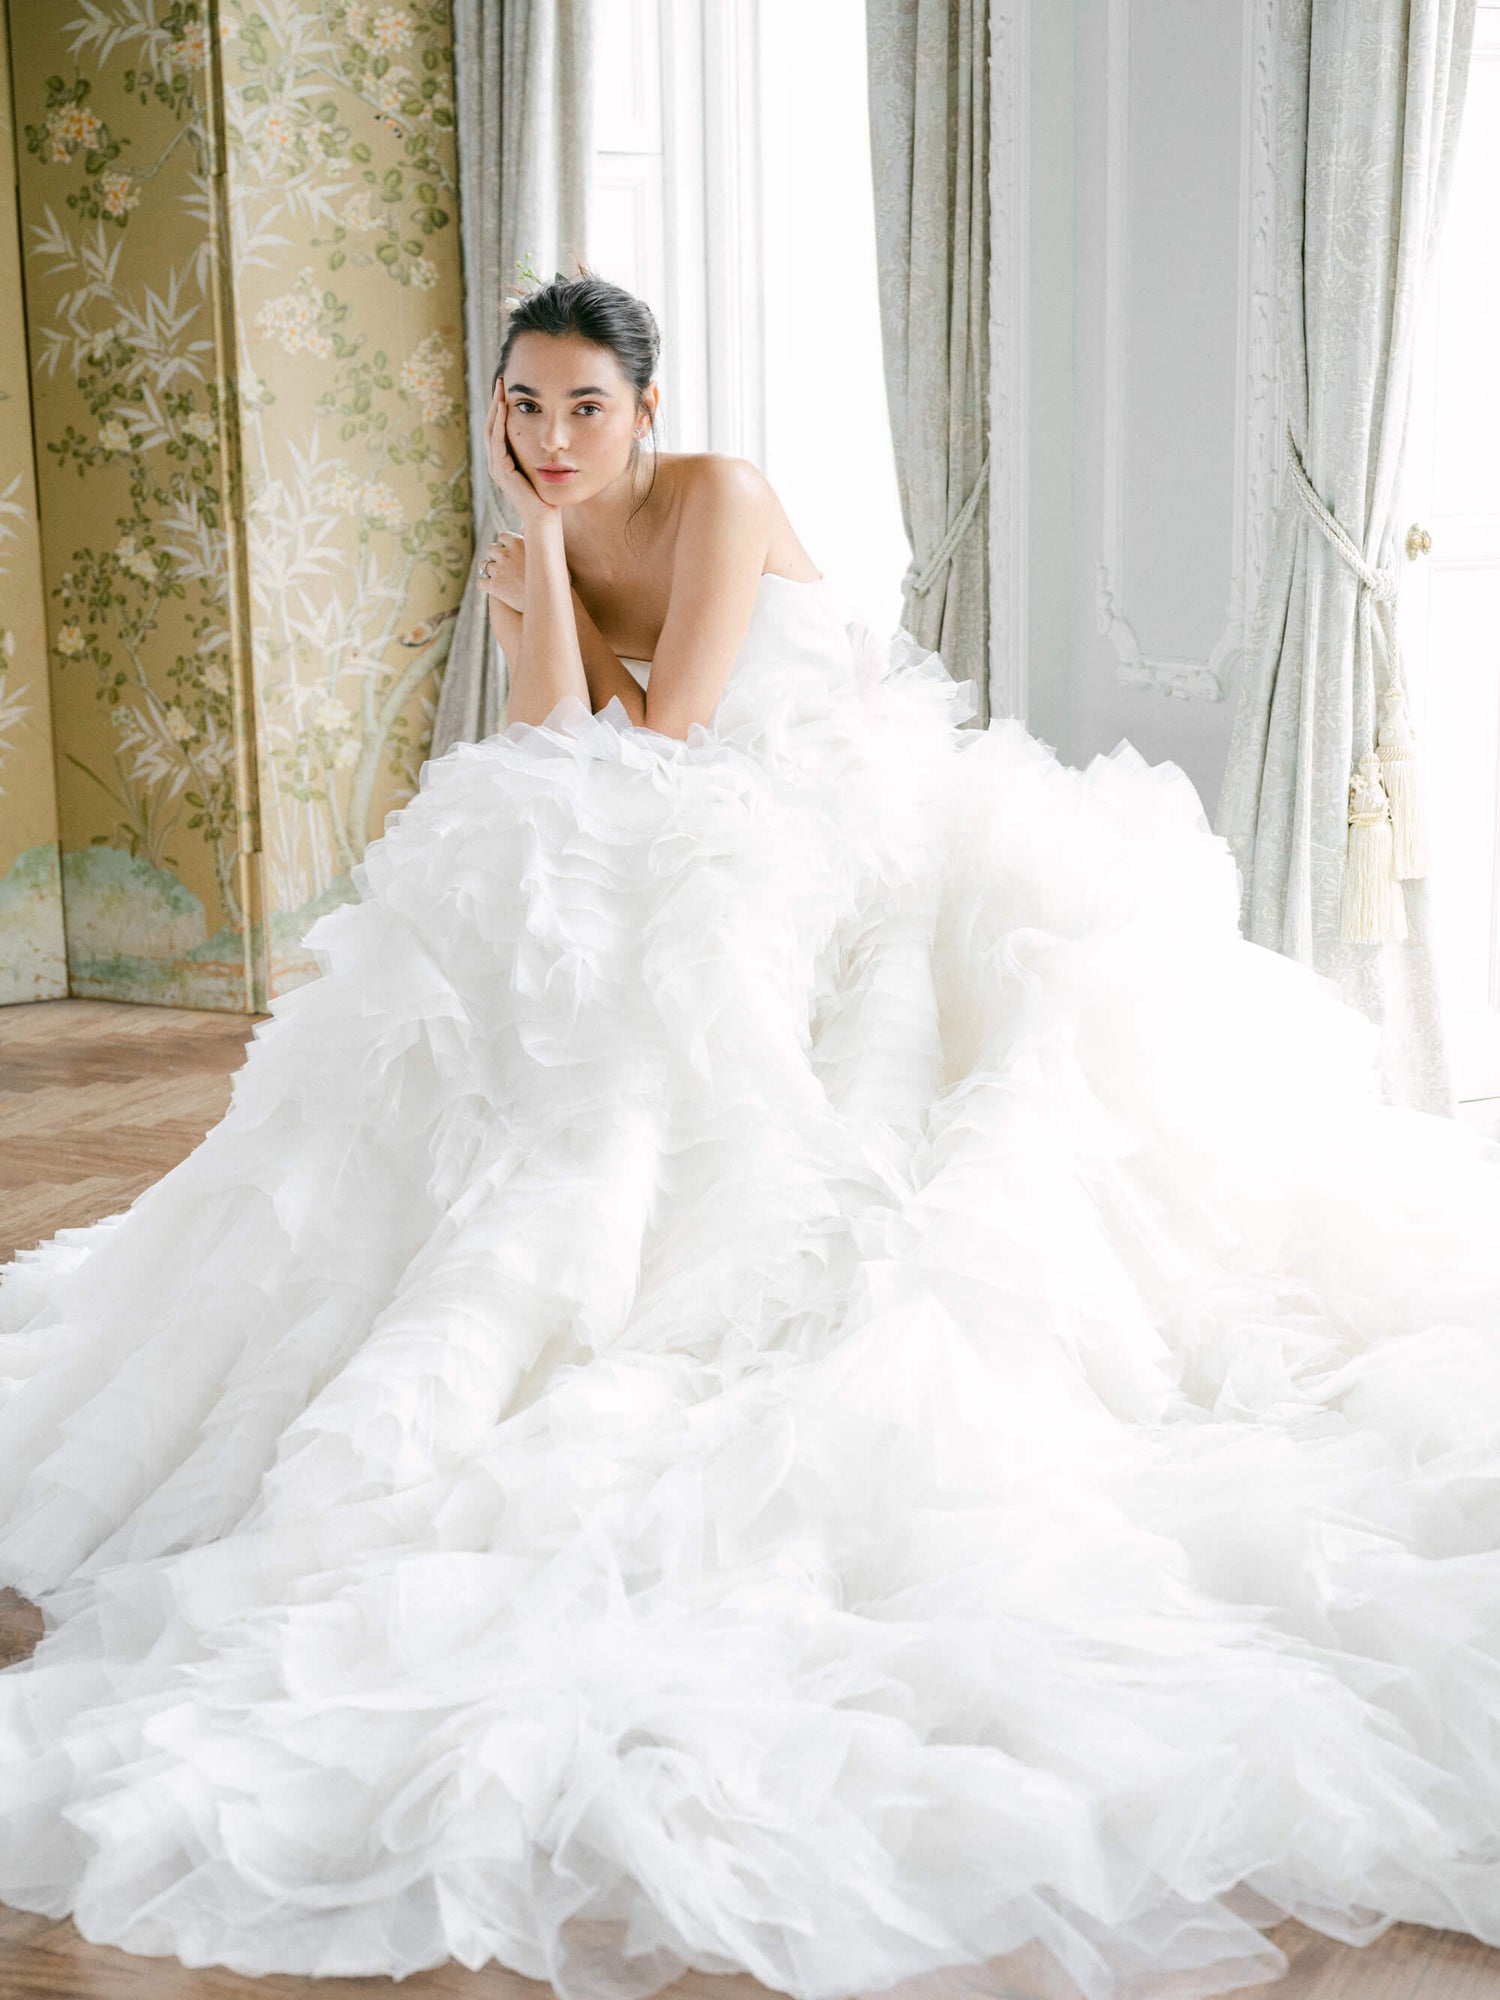 Monique Lhuillier white strapless bridal gown with full tulle skirt.